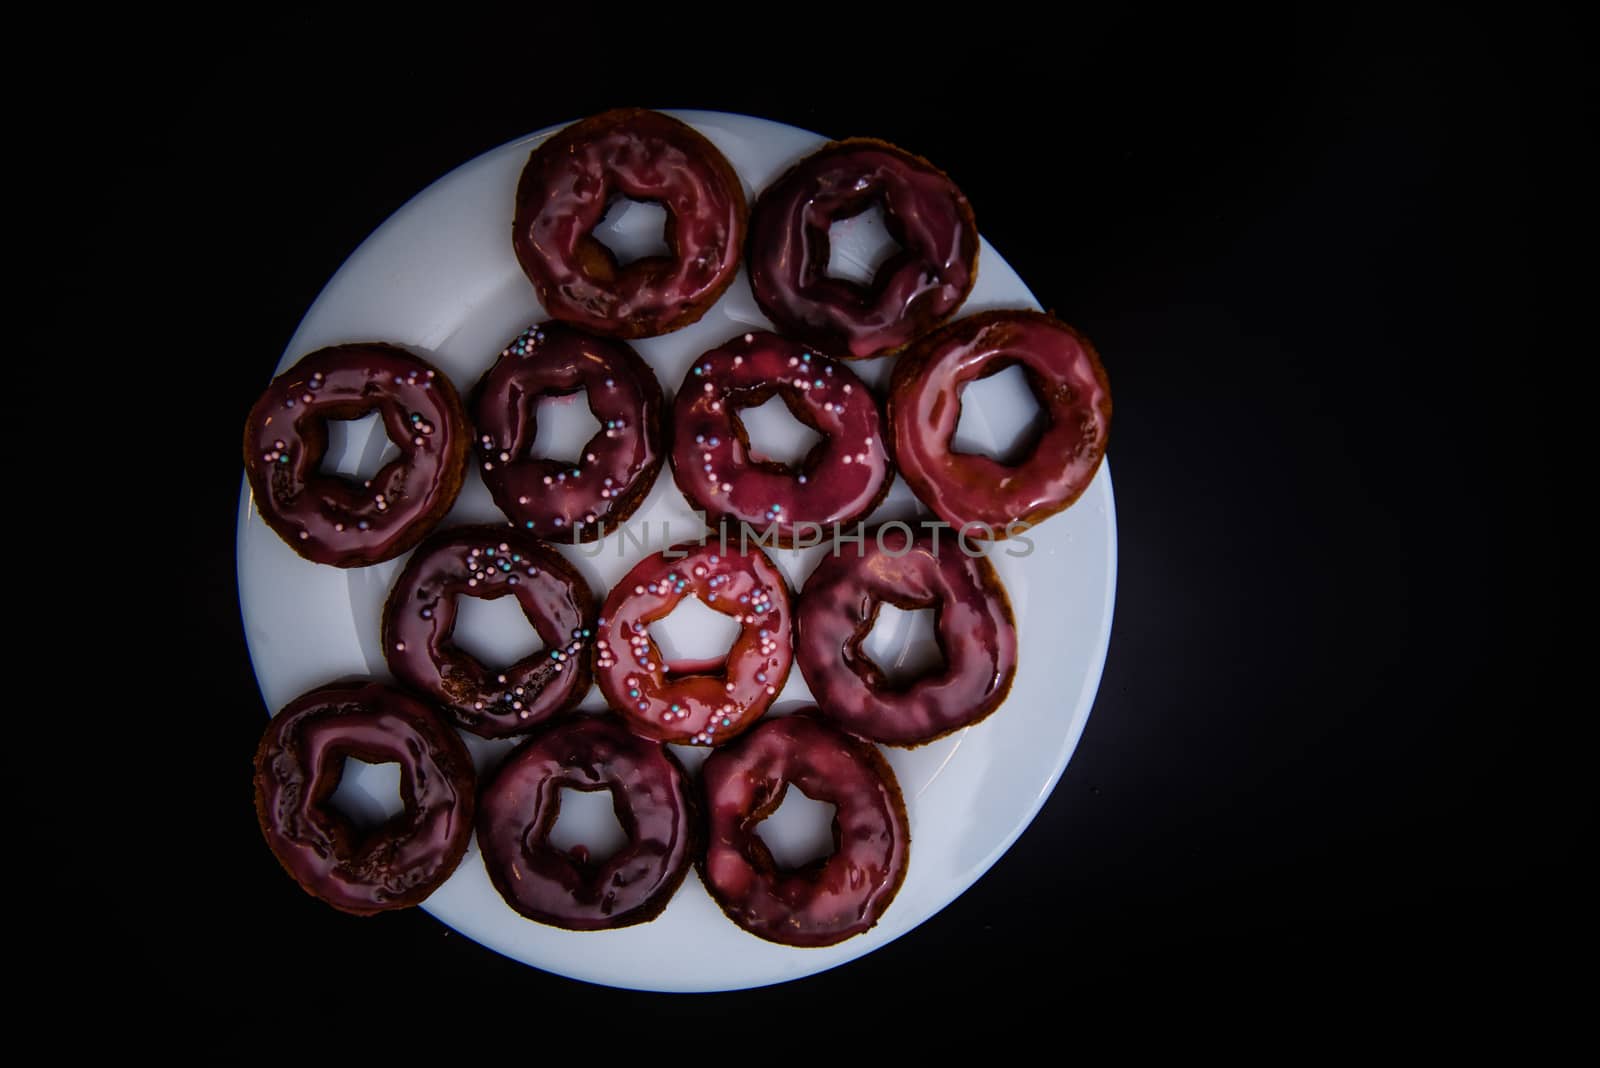 assorted donuts with chocolate frosted, pink glazed and sprinkles donuts. Donuts on white plate with black background